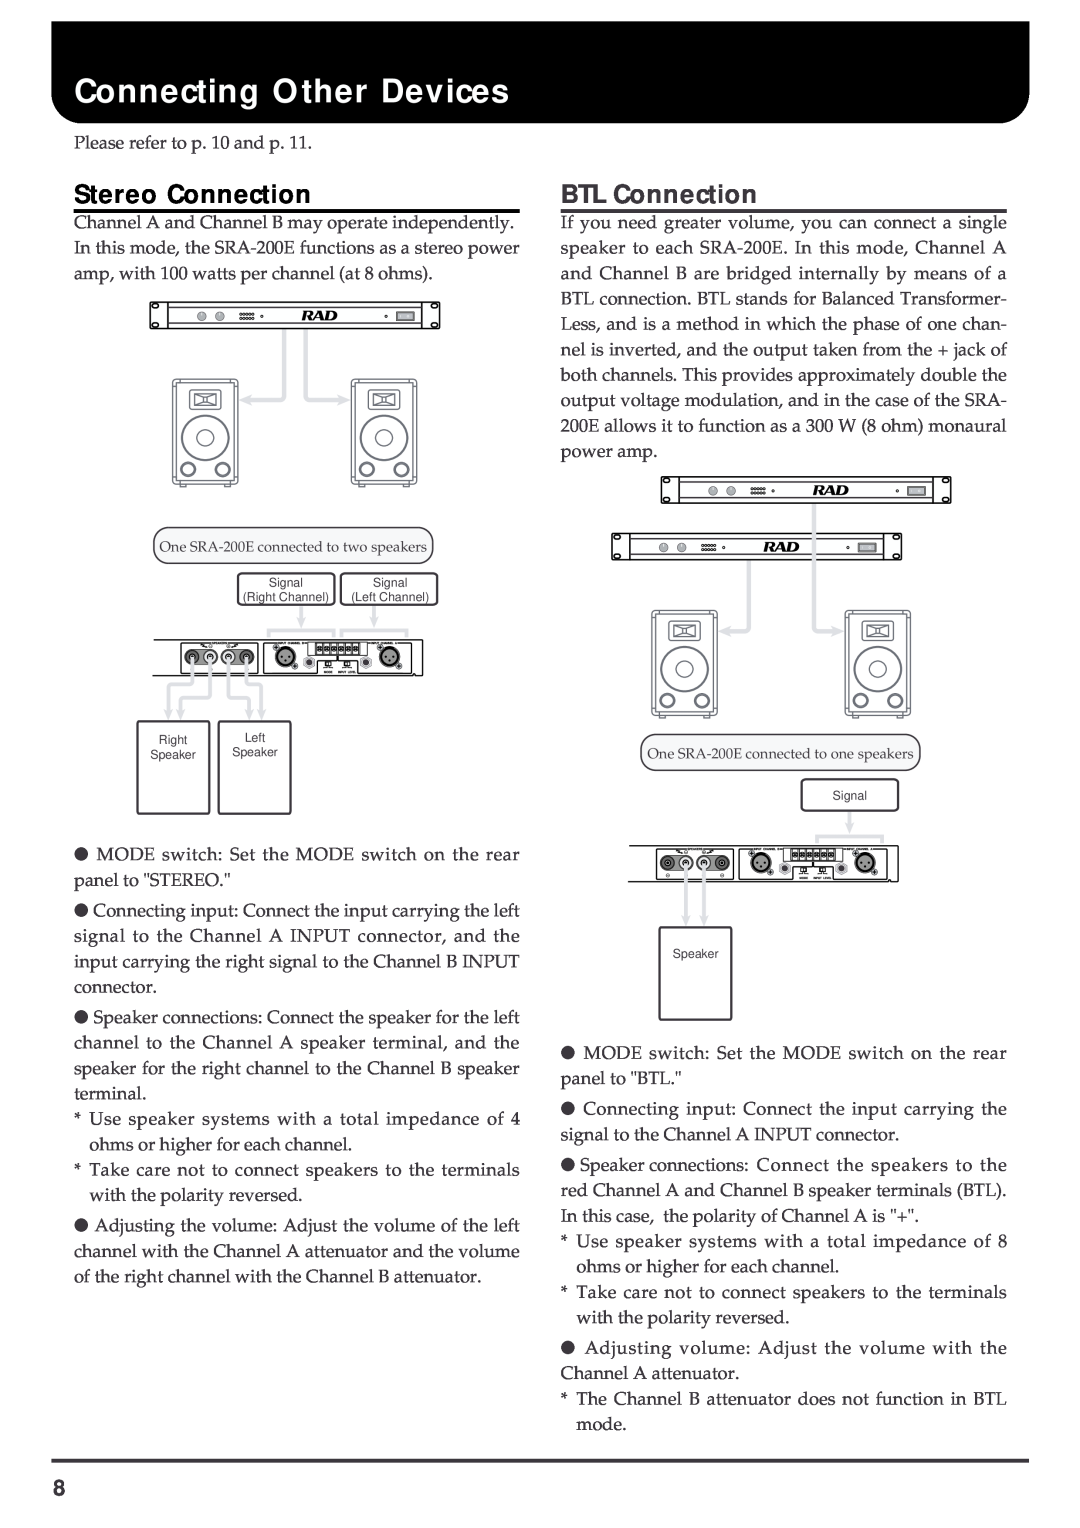 Roland SRA-200E important safety instructions Connecting Other Devices, Stereo Connection, BTL Connection 